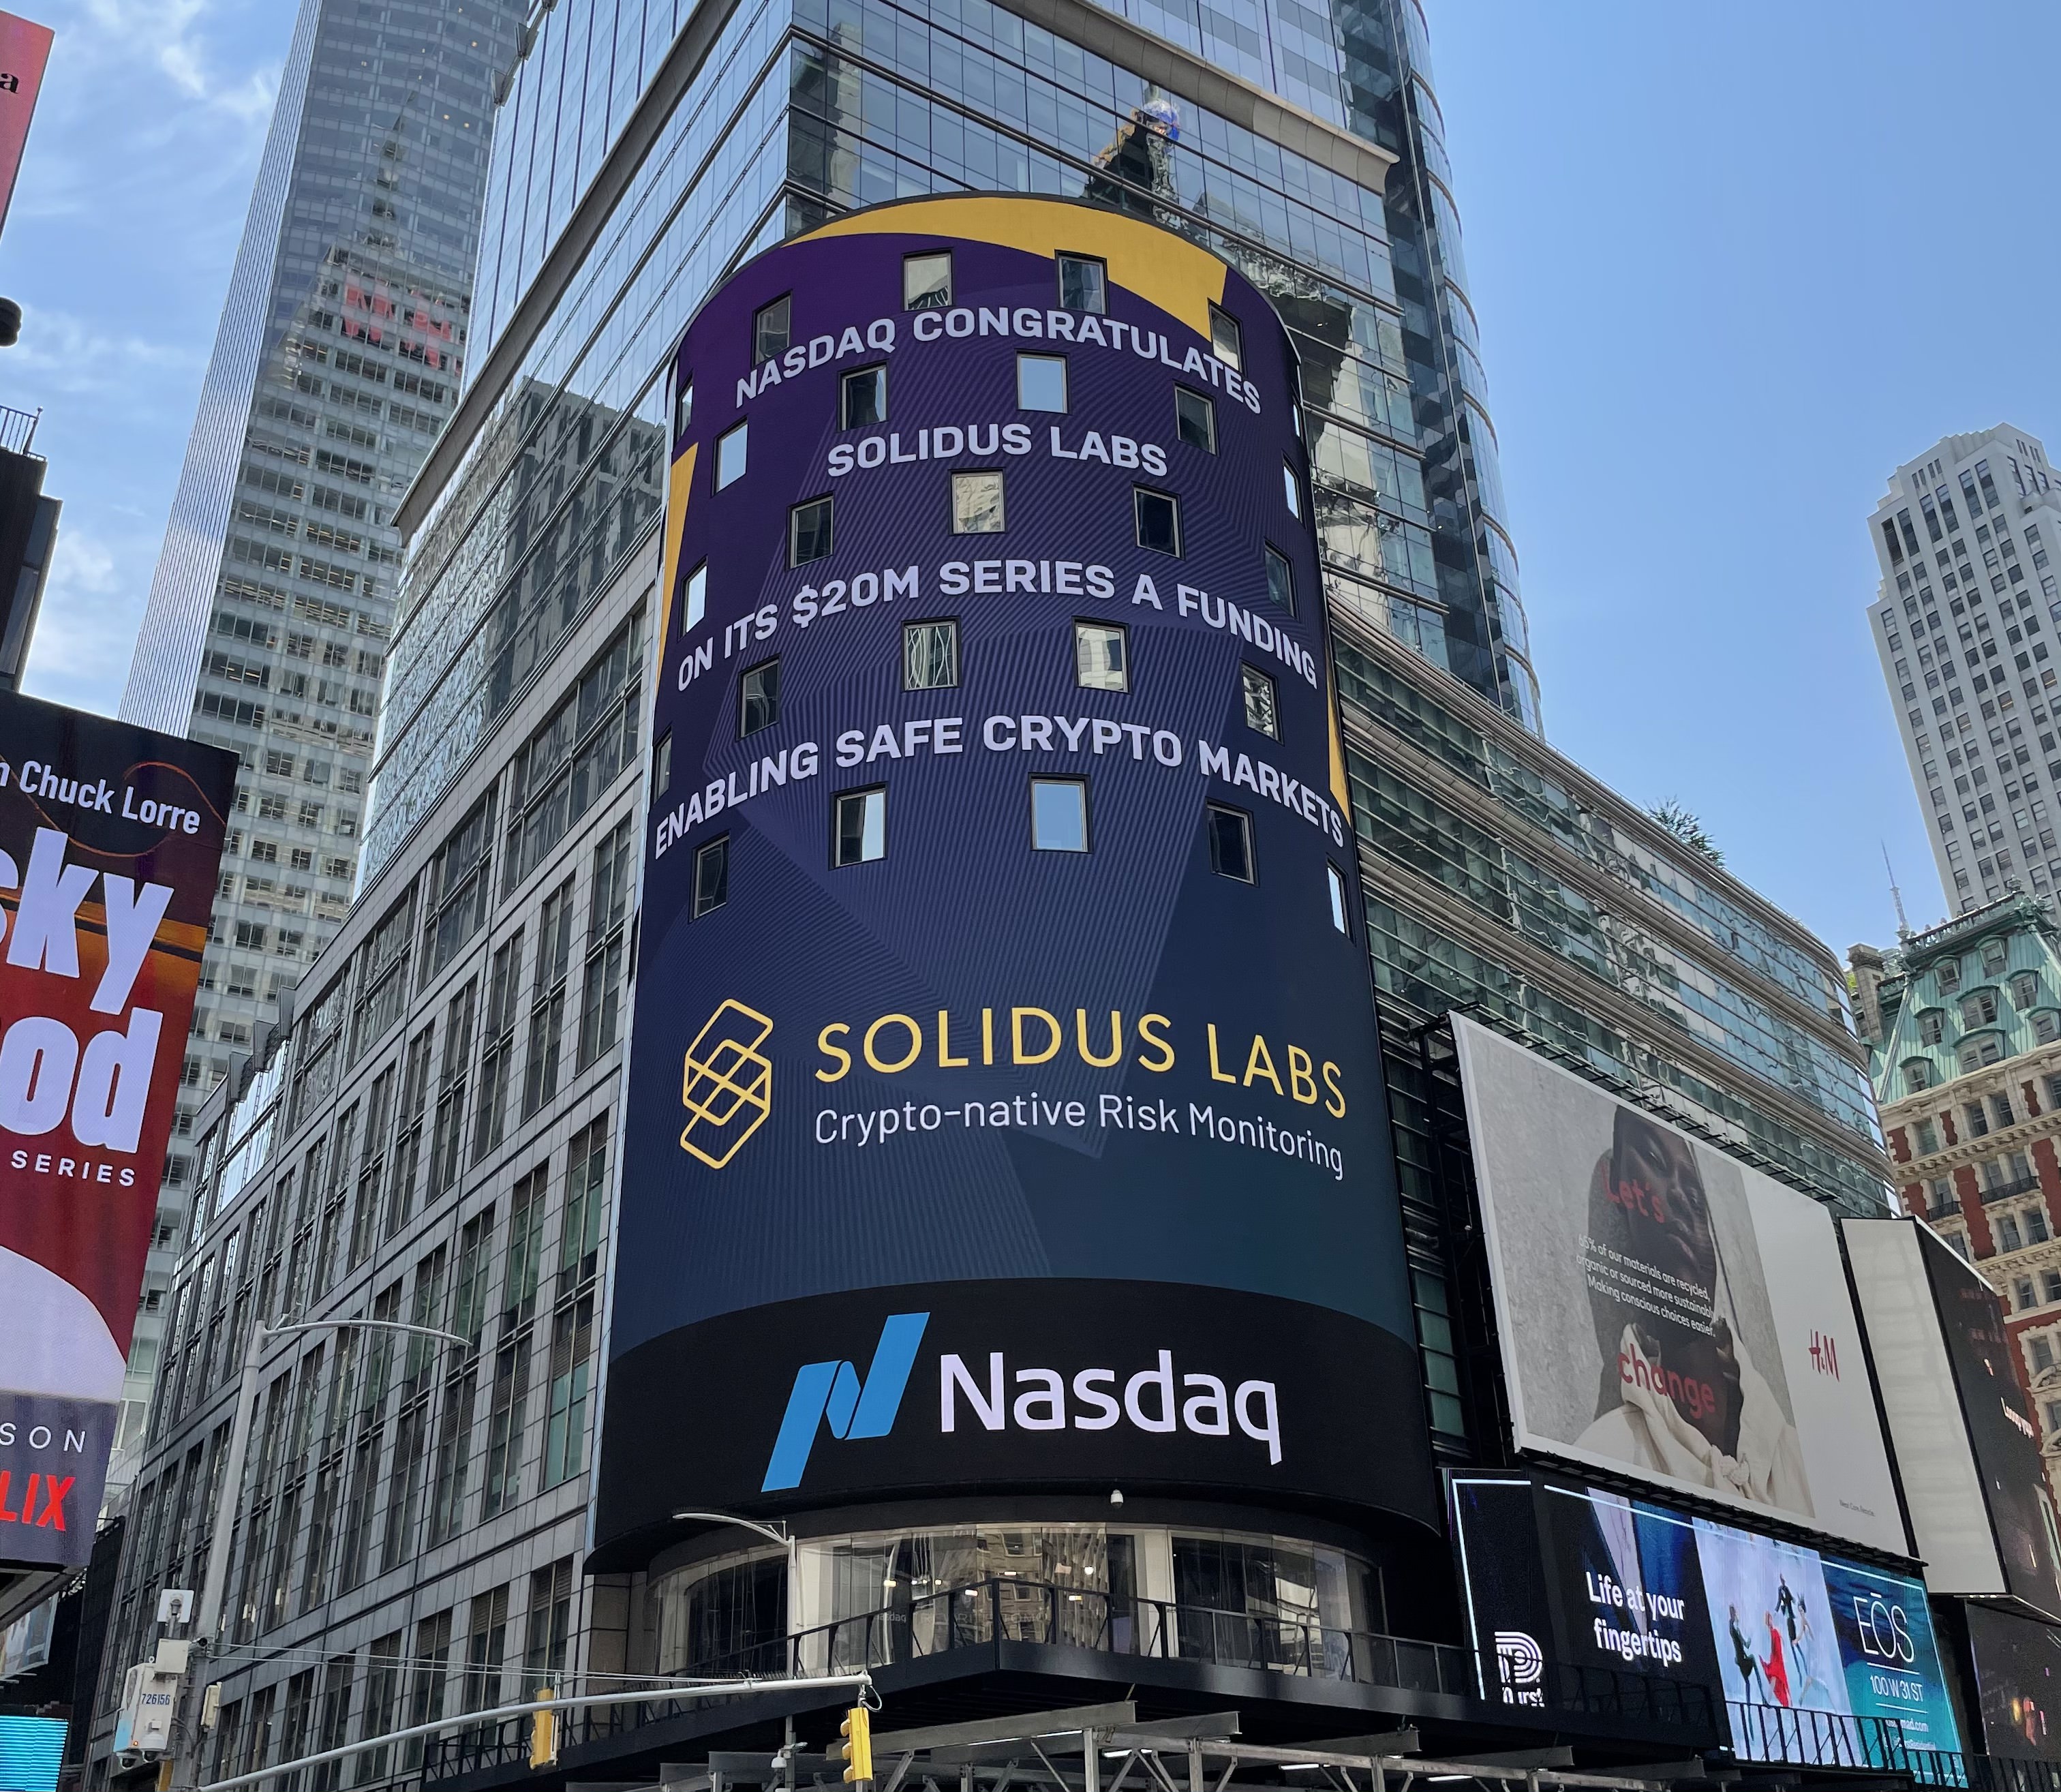 Solidus Labs, Monday, May 24, 2021, Press release picture